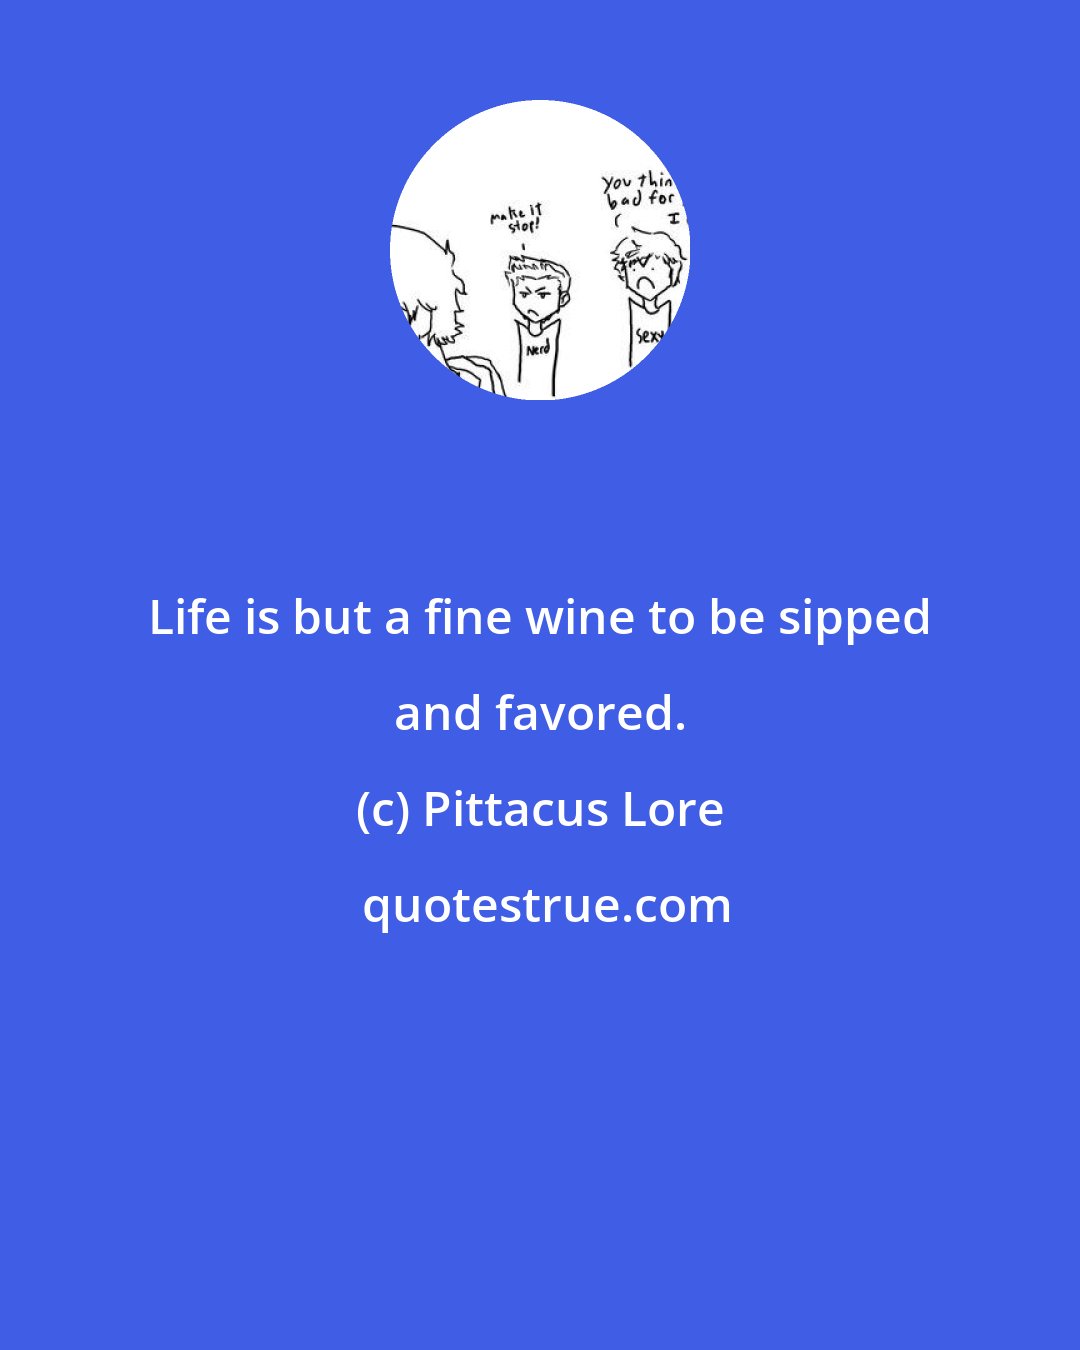 Pittacus Lore: Life is but a fine wine to be sipped and favored.